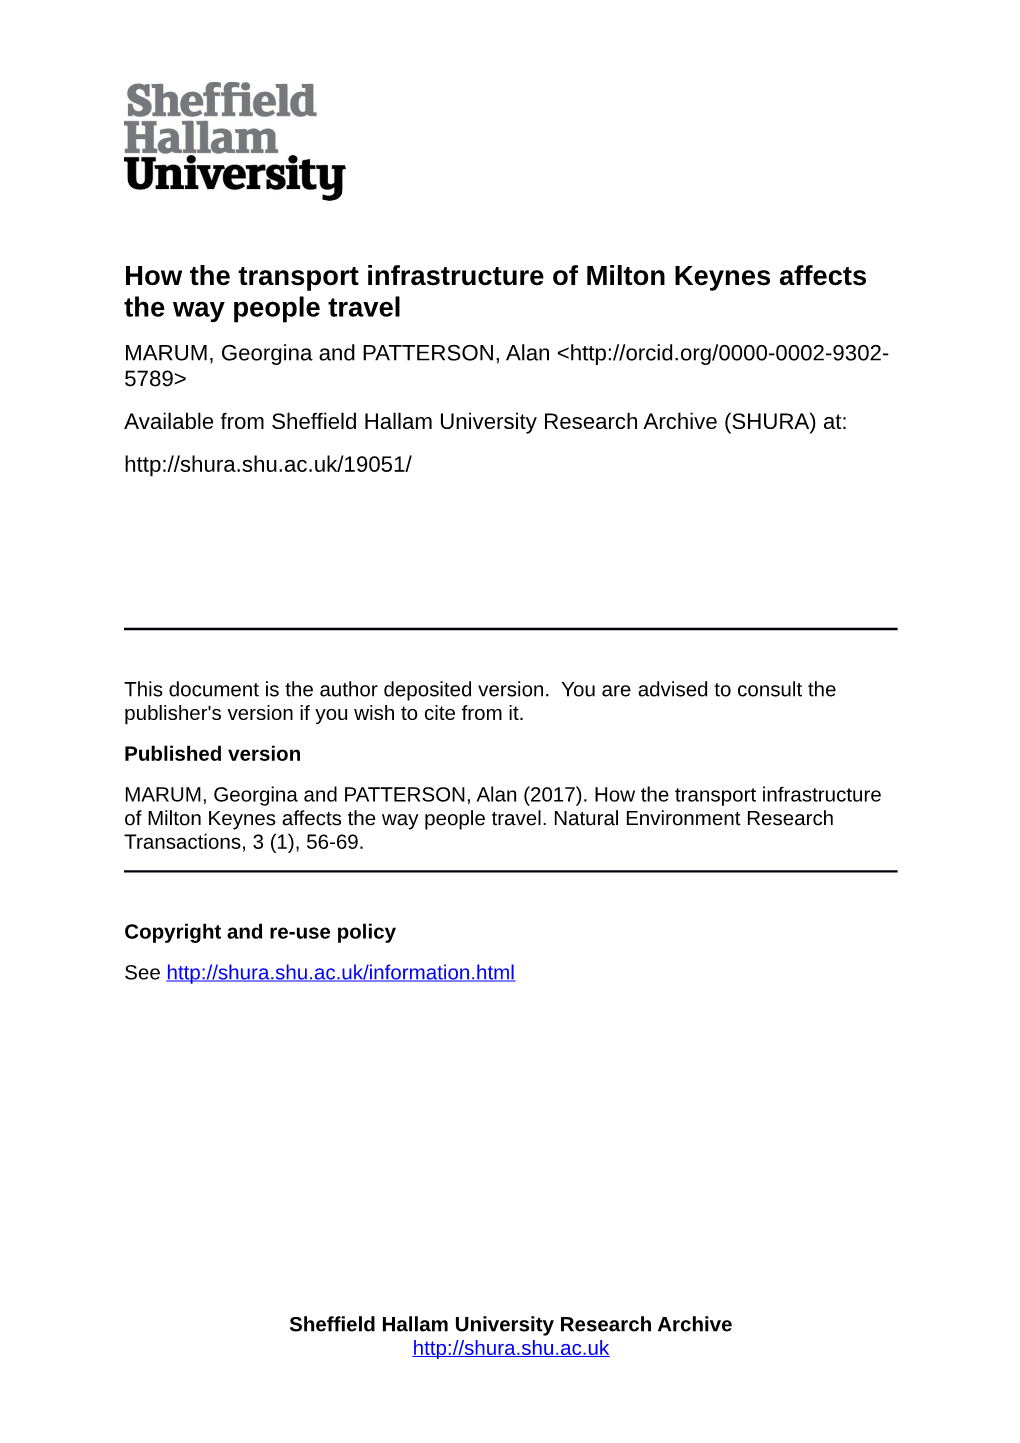 How the Transport Infrastructure of Milton Keynes Affects the Way